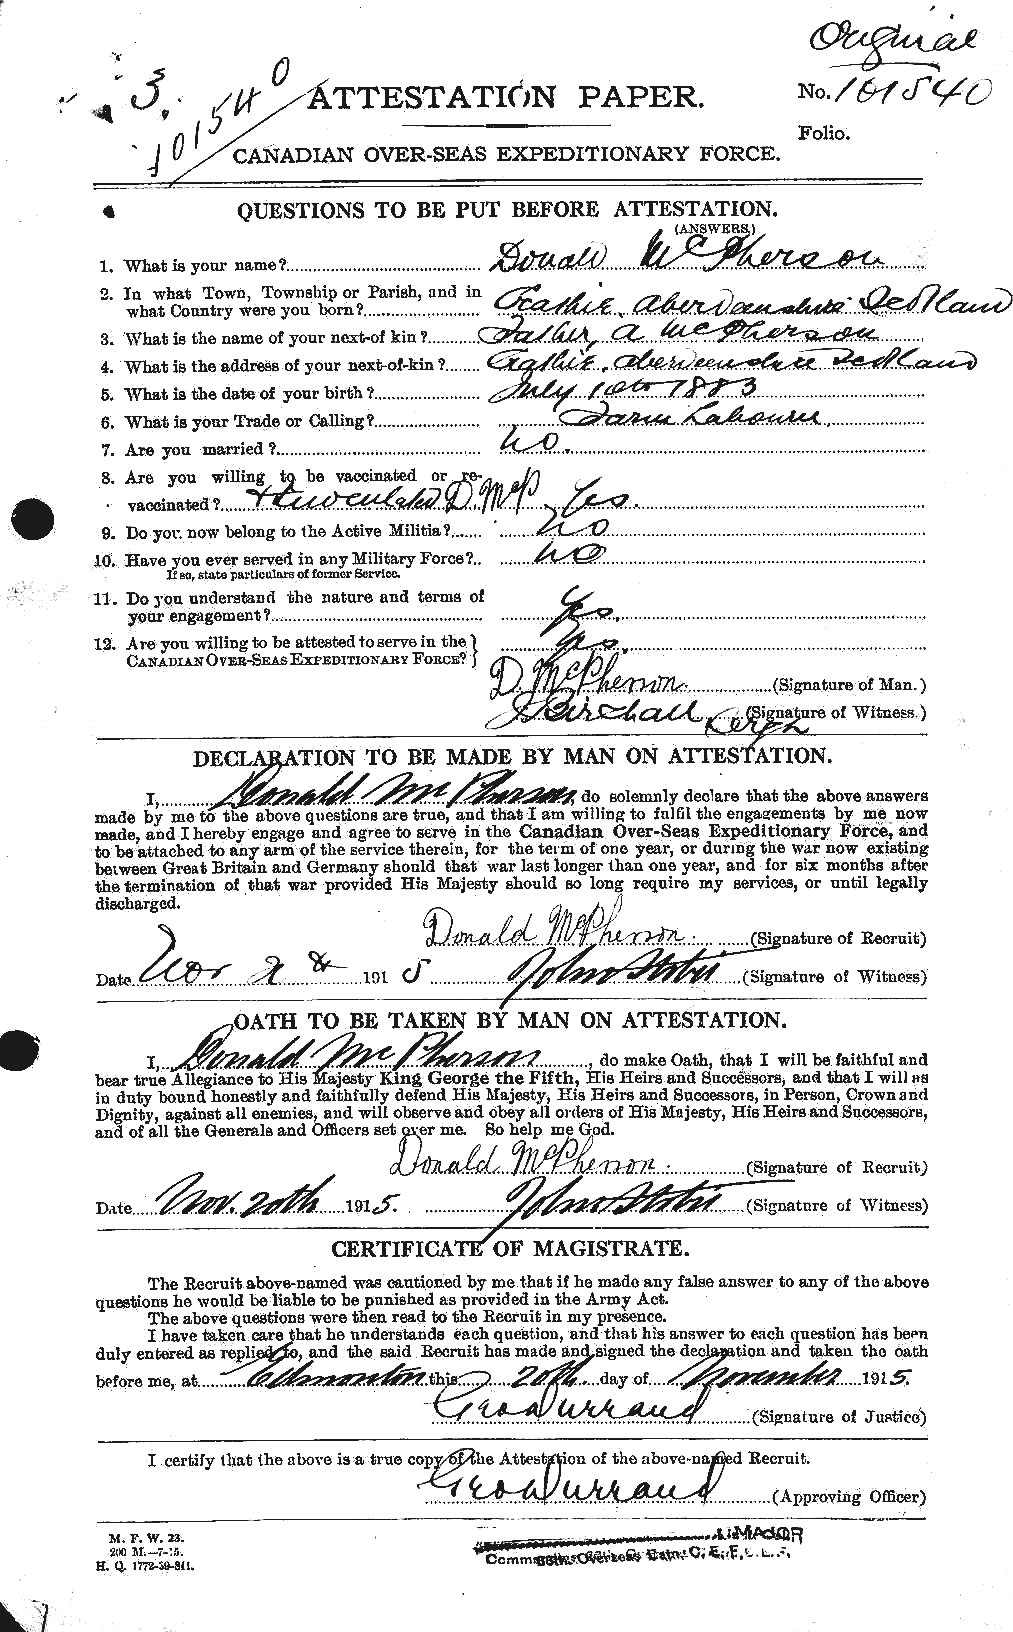 Personnel Records of the First World War - CEF 541476a